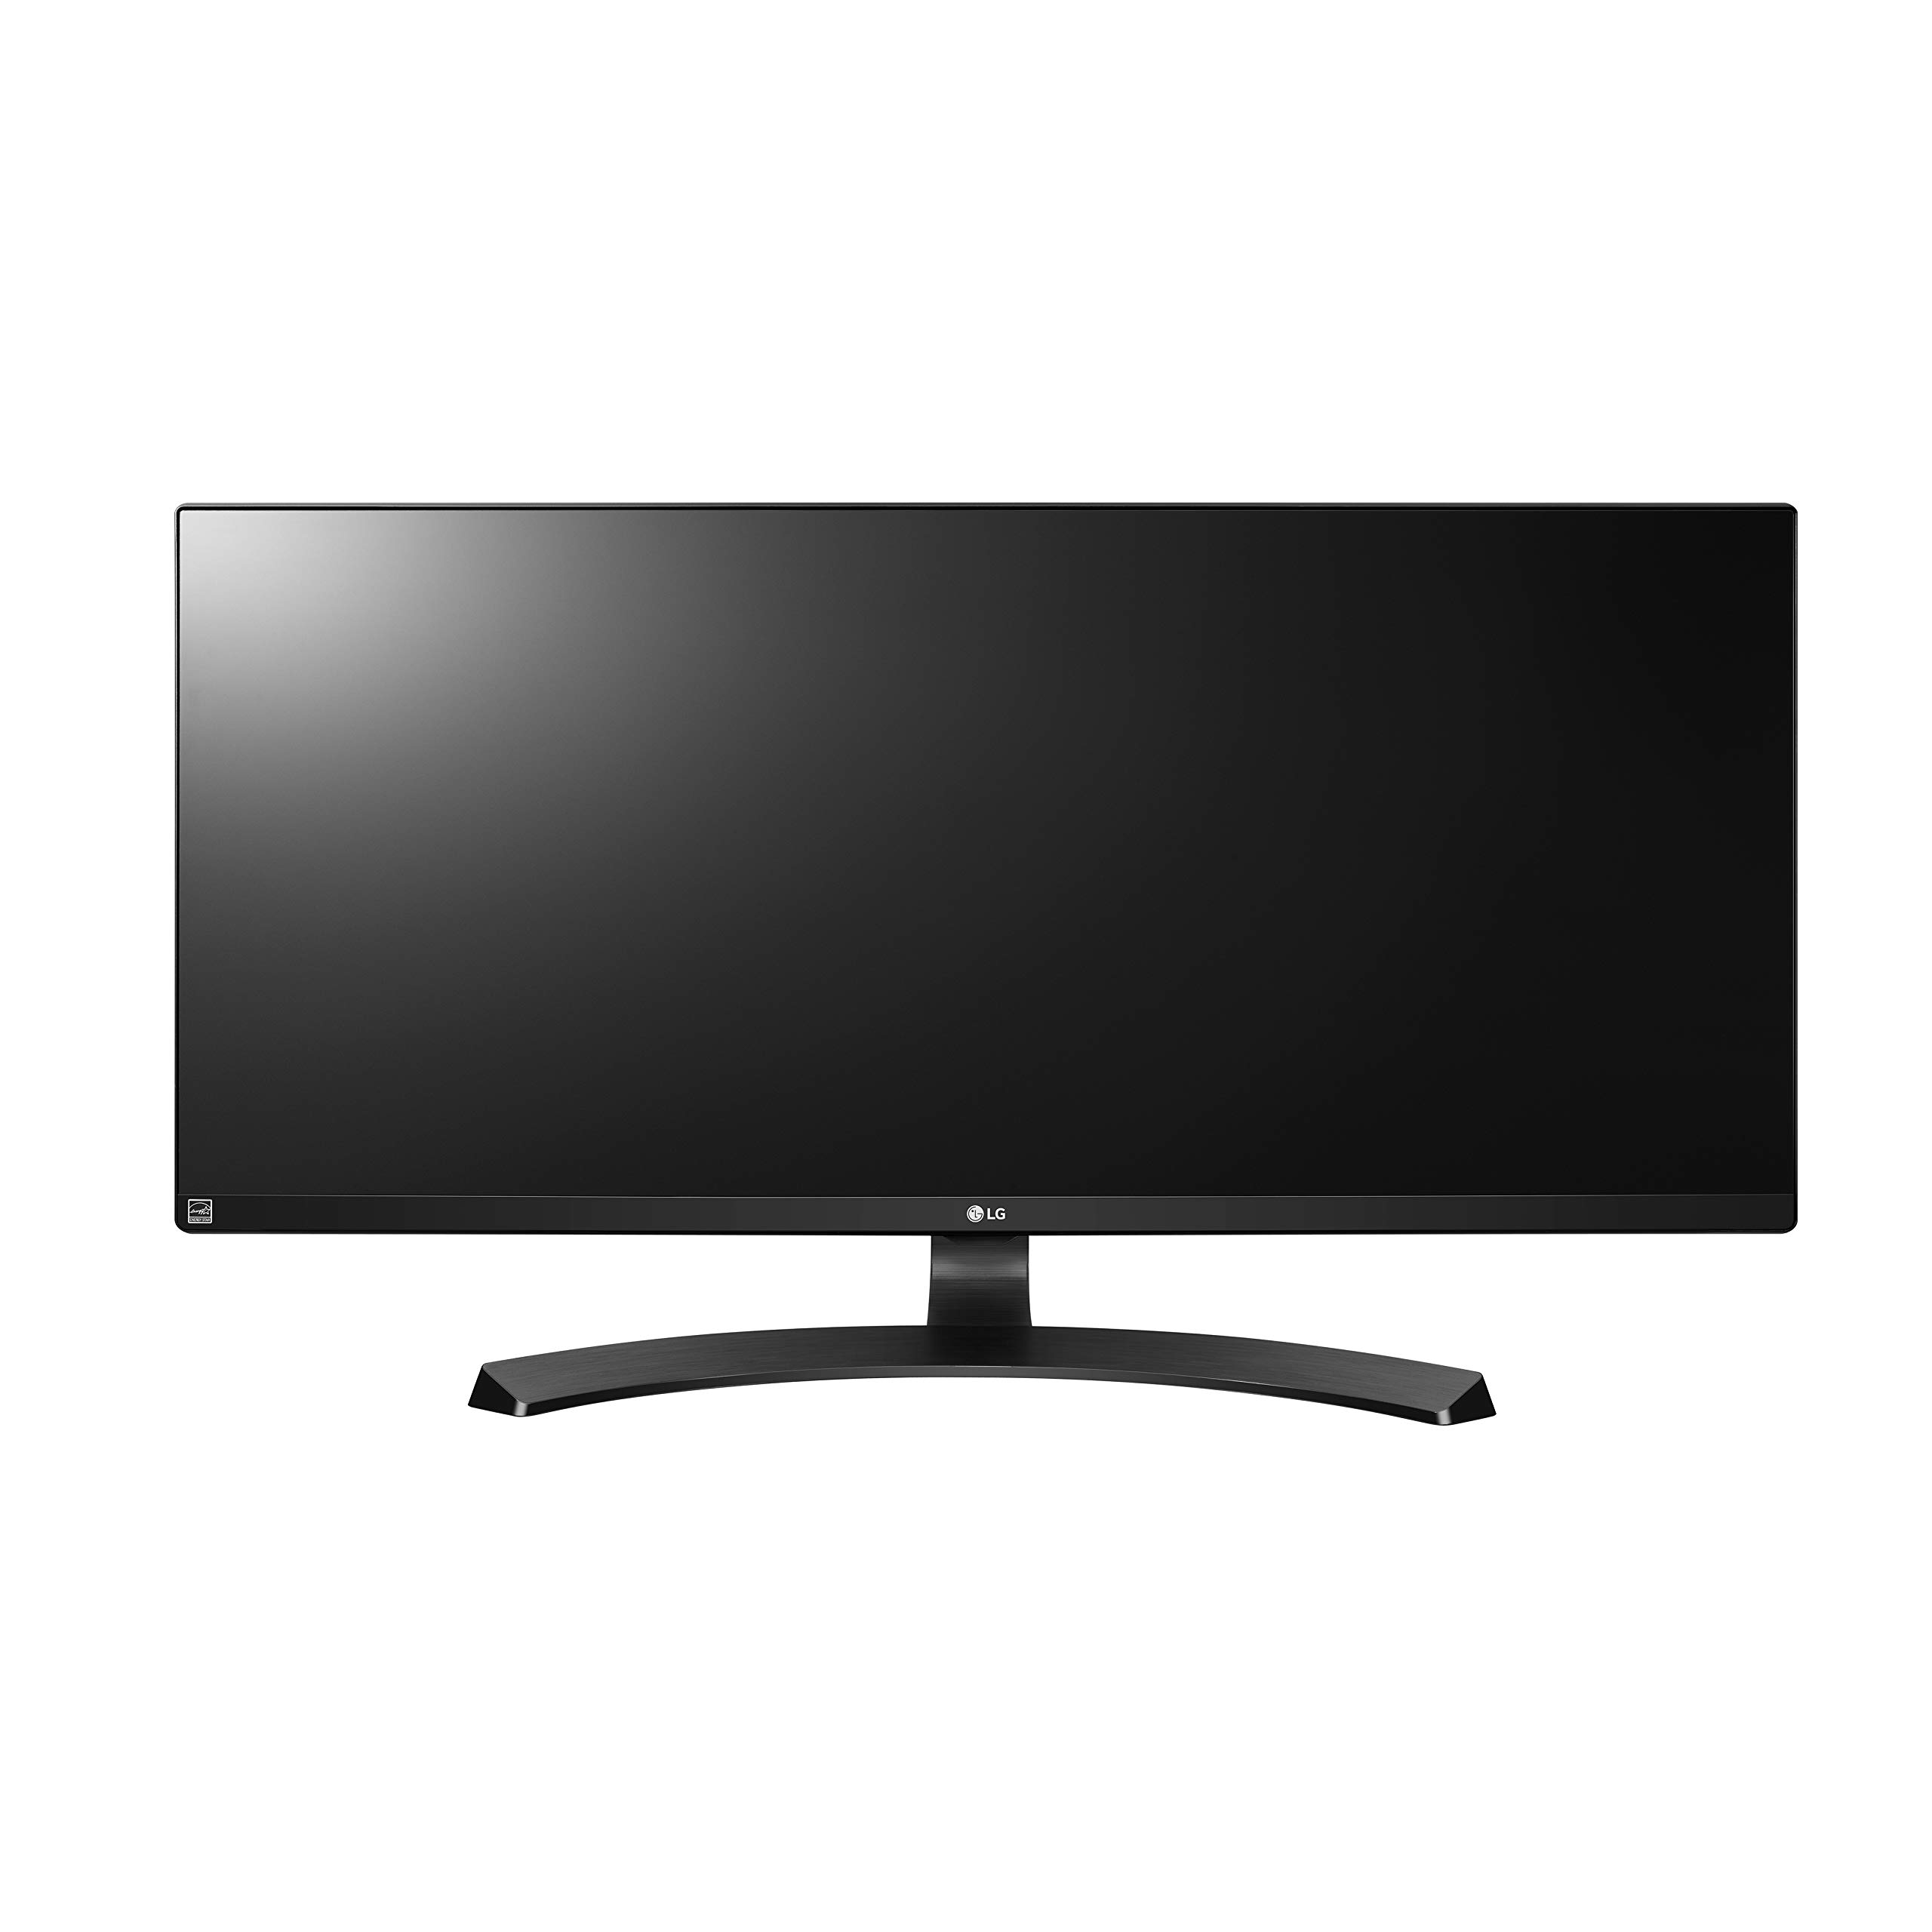 LG 34WL750-B 34 inch 21: 9 UltraWide WQHD IPS Monitor with sRGB 99% Color Gamut and HDR10 Compatibility - Black